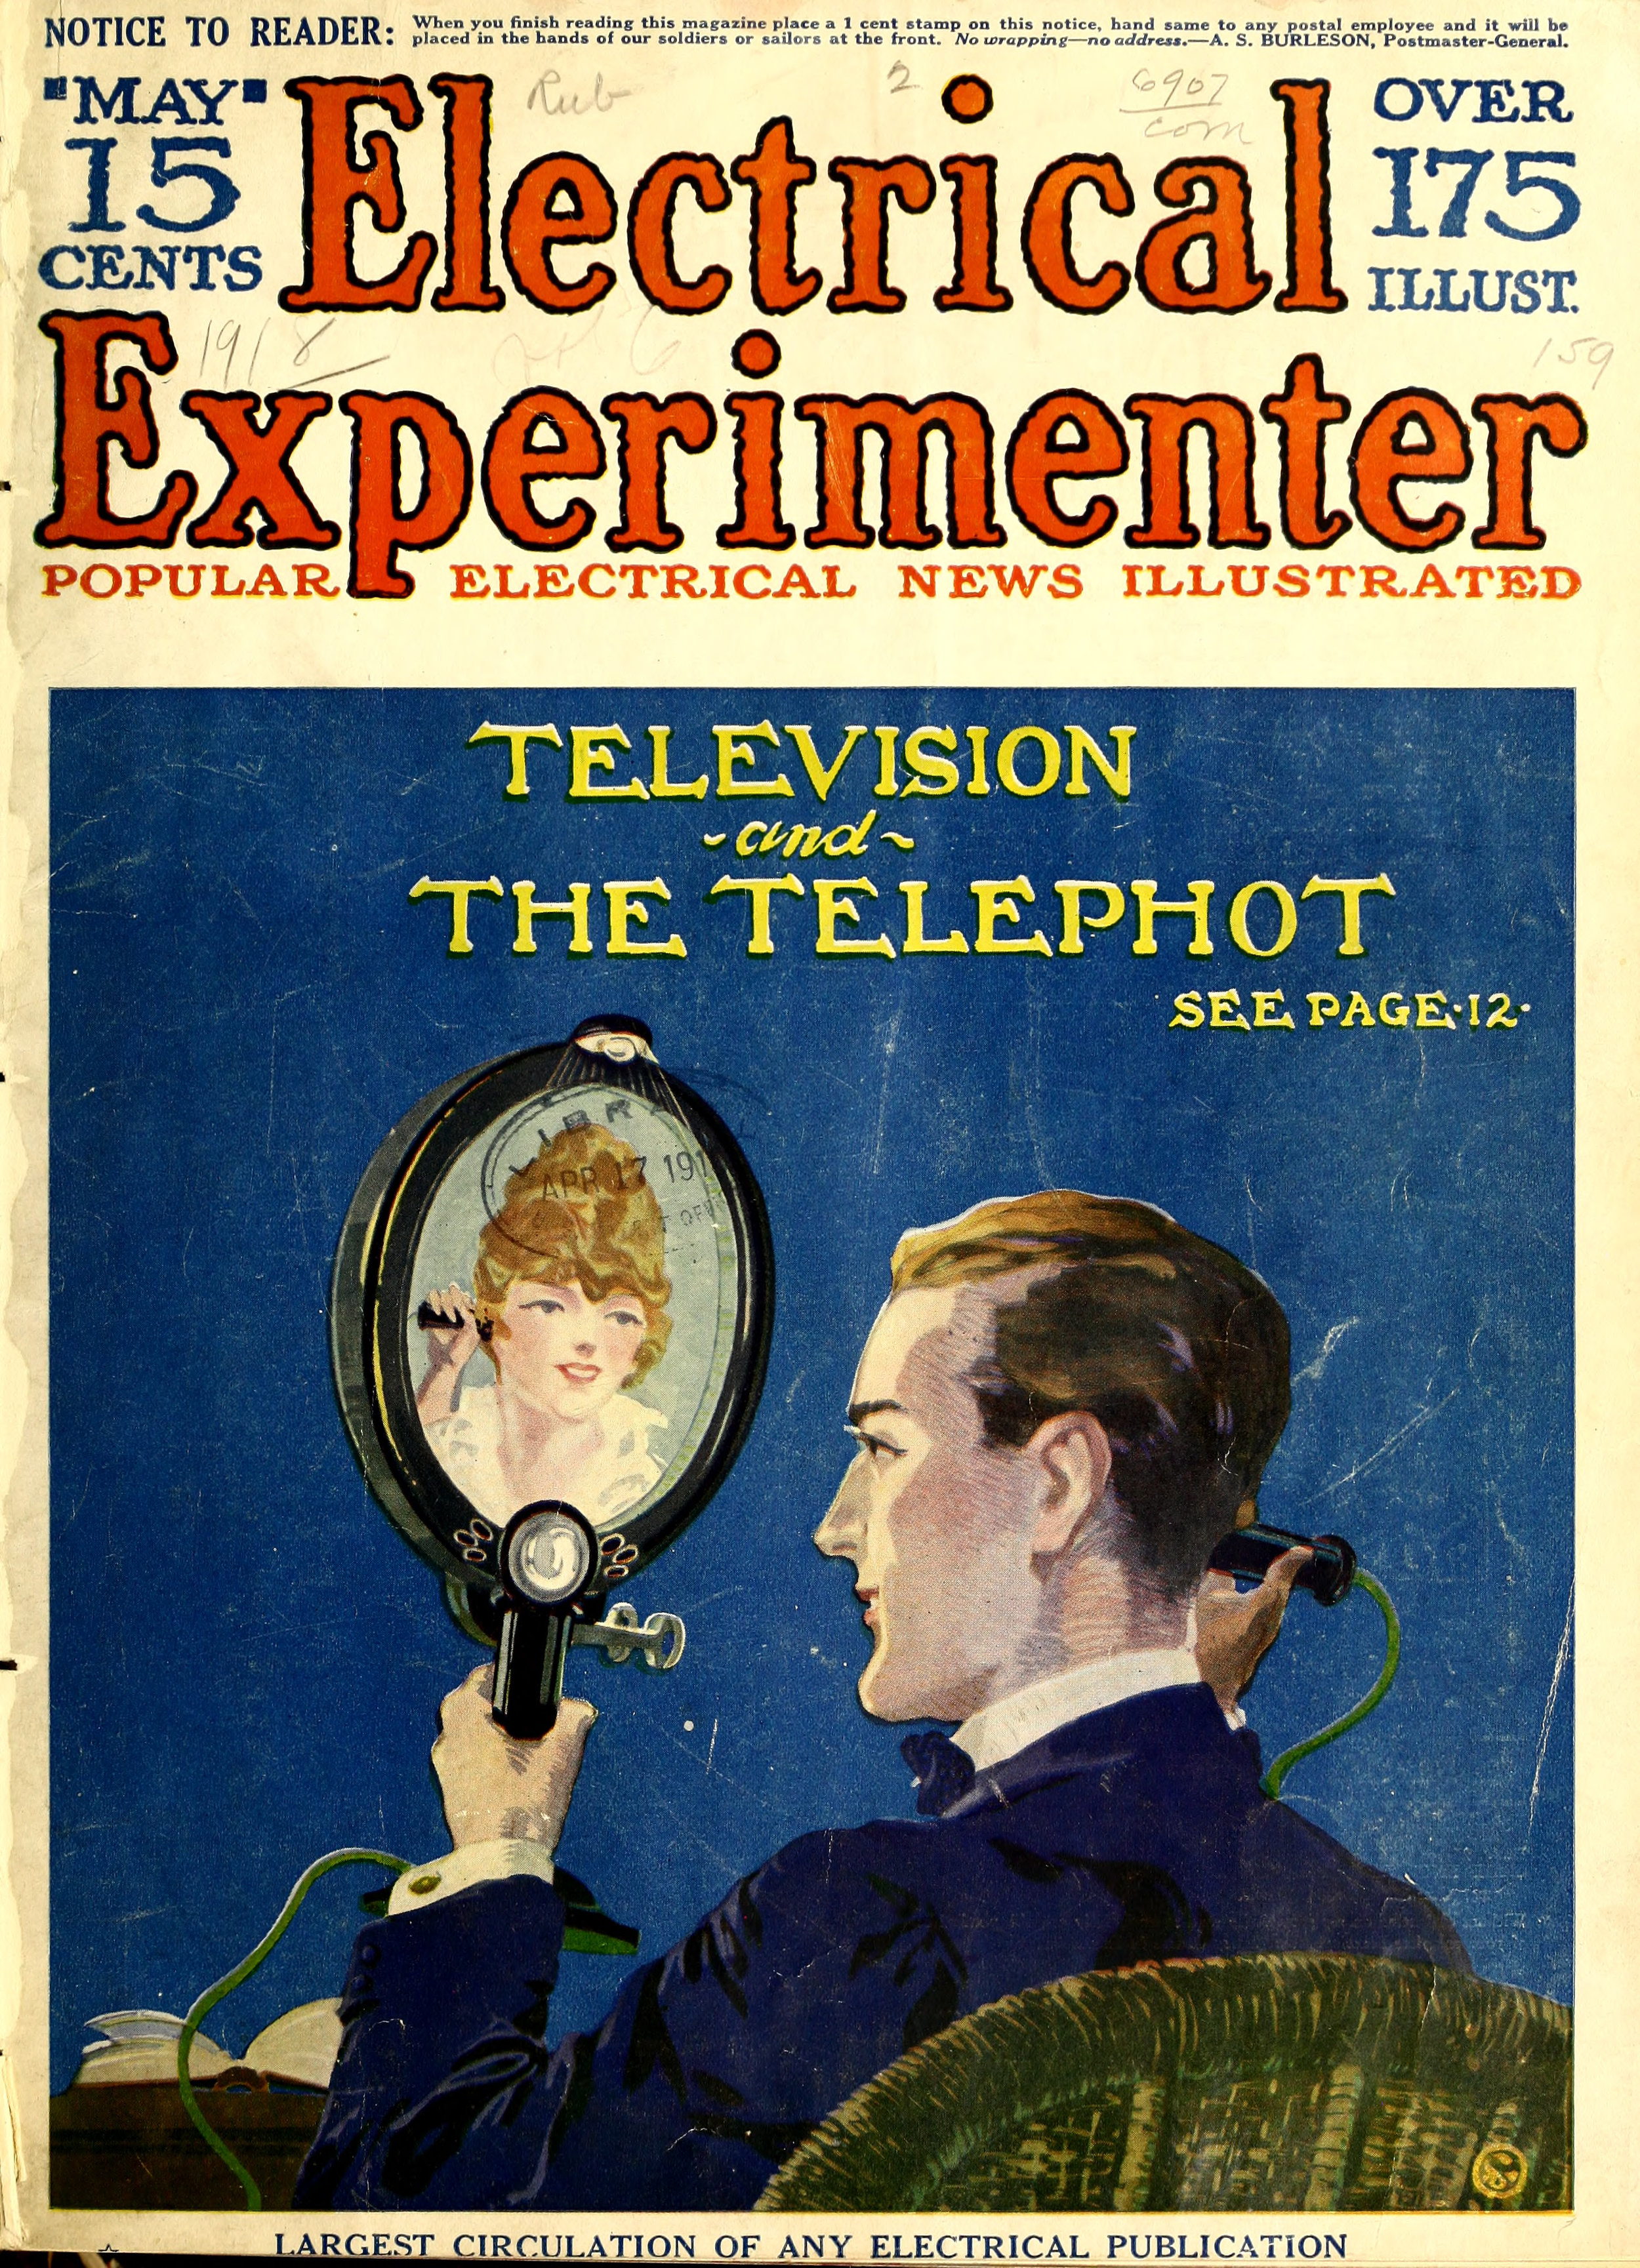 1908 Electrical_Experimenter_May1918_01_TV_Cover.jpg